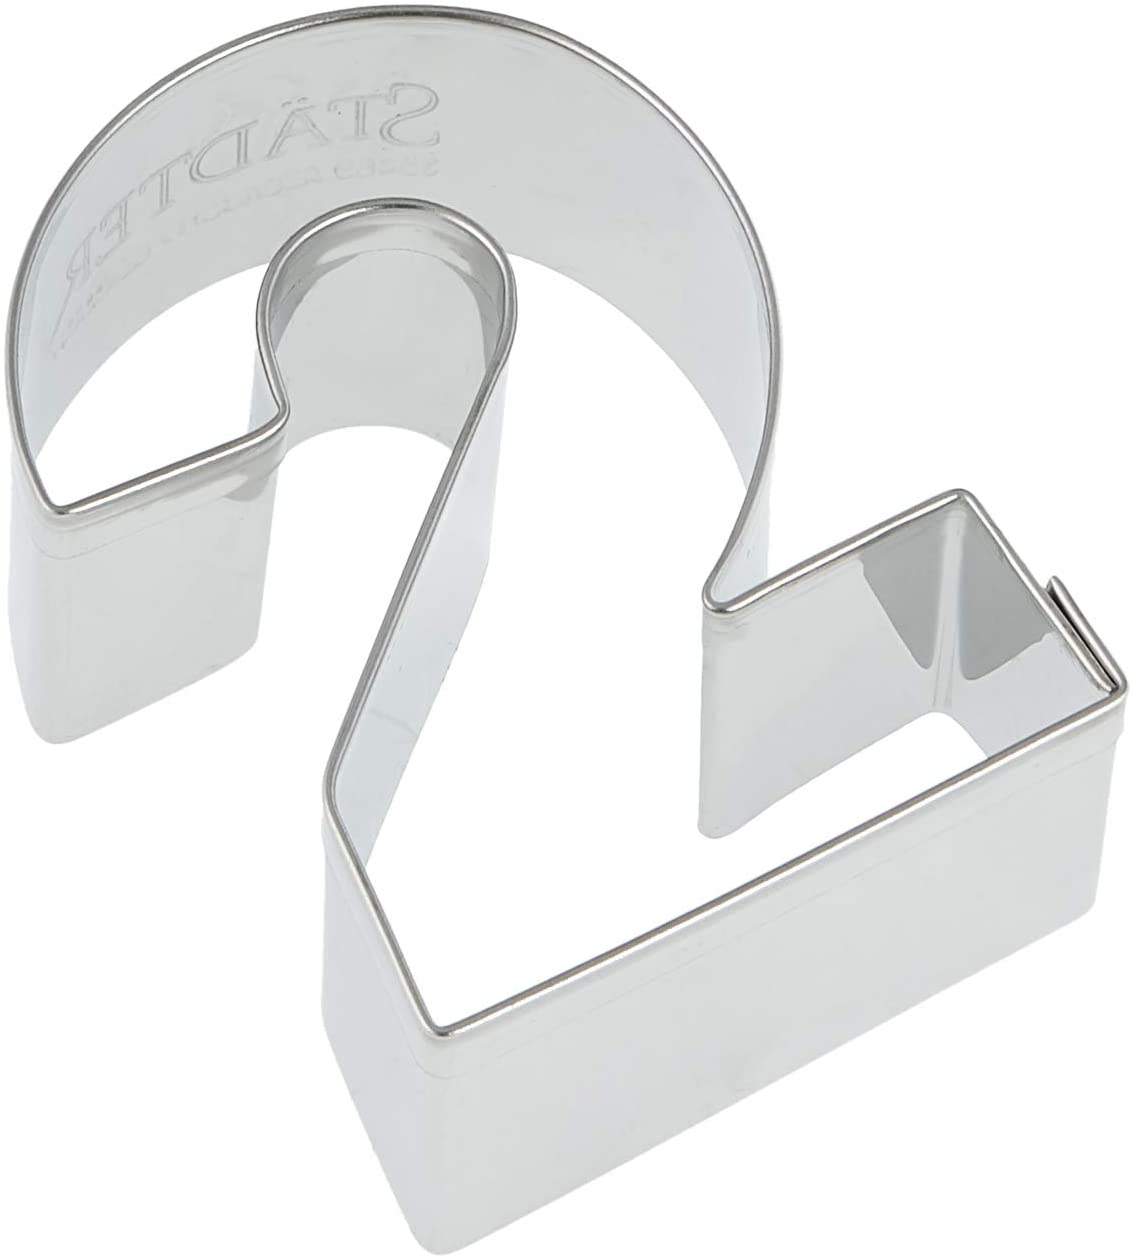 Staedter Cookie Cutter Number 2, Stainless Steel, 6.5 Cm